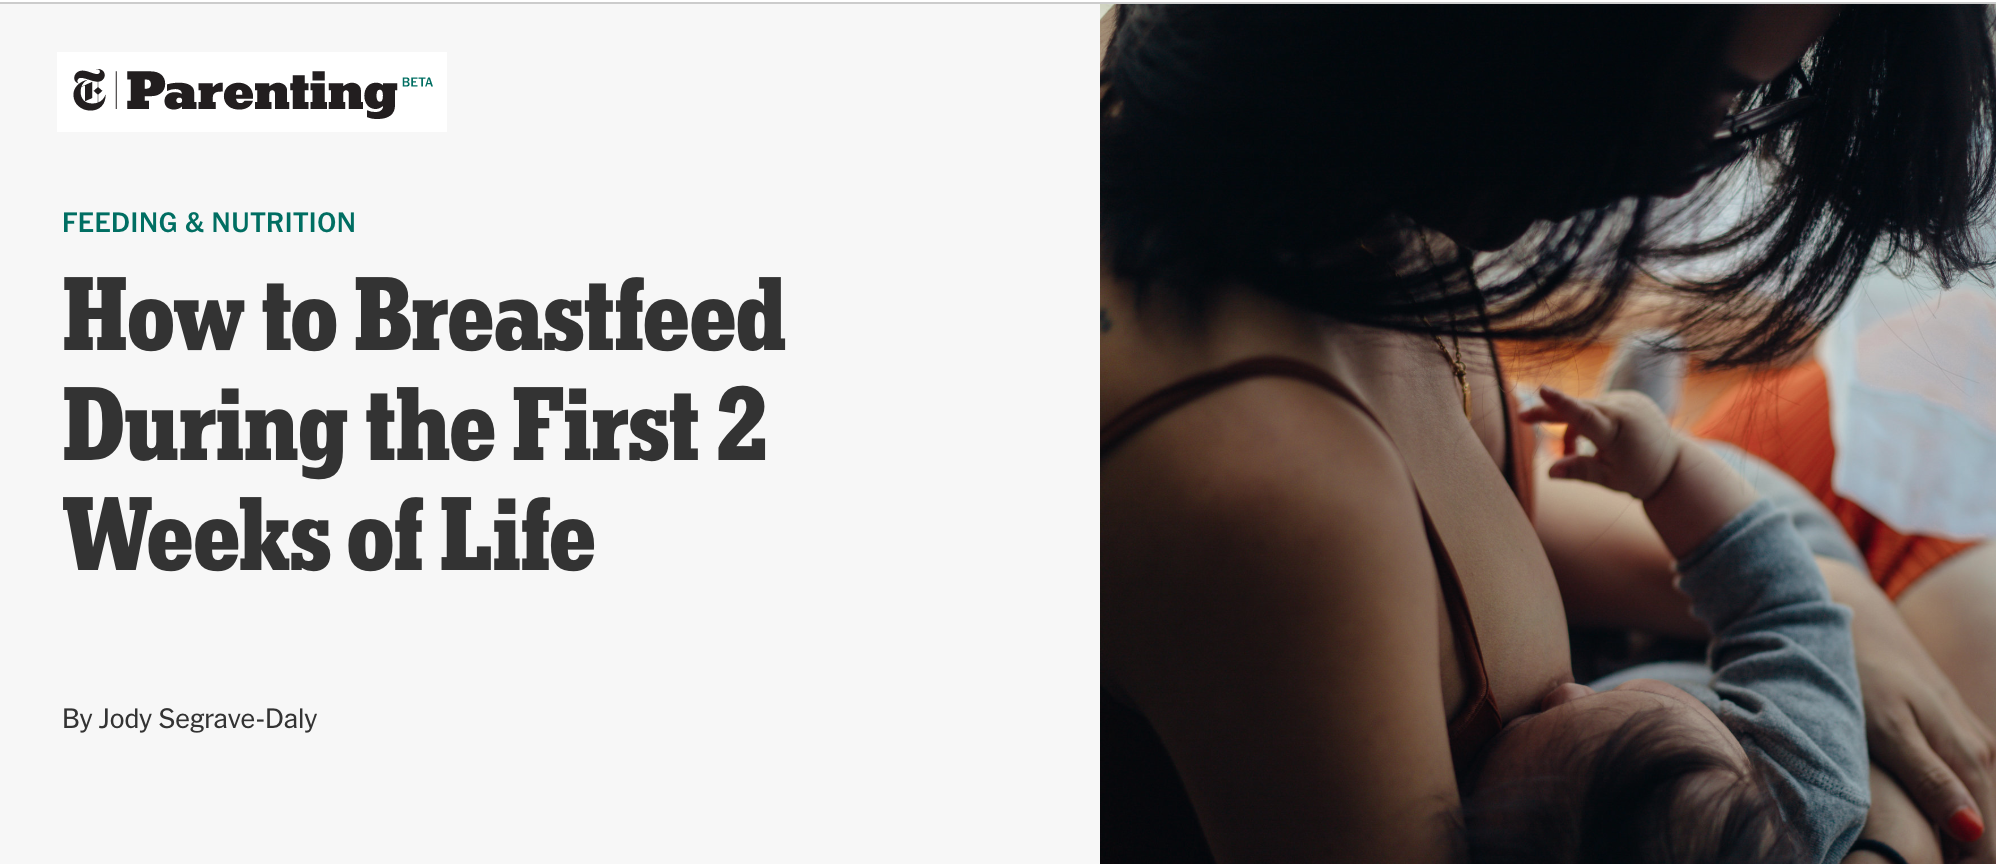 How to Breastfeed During the First 2 Weeks of Life